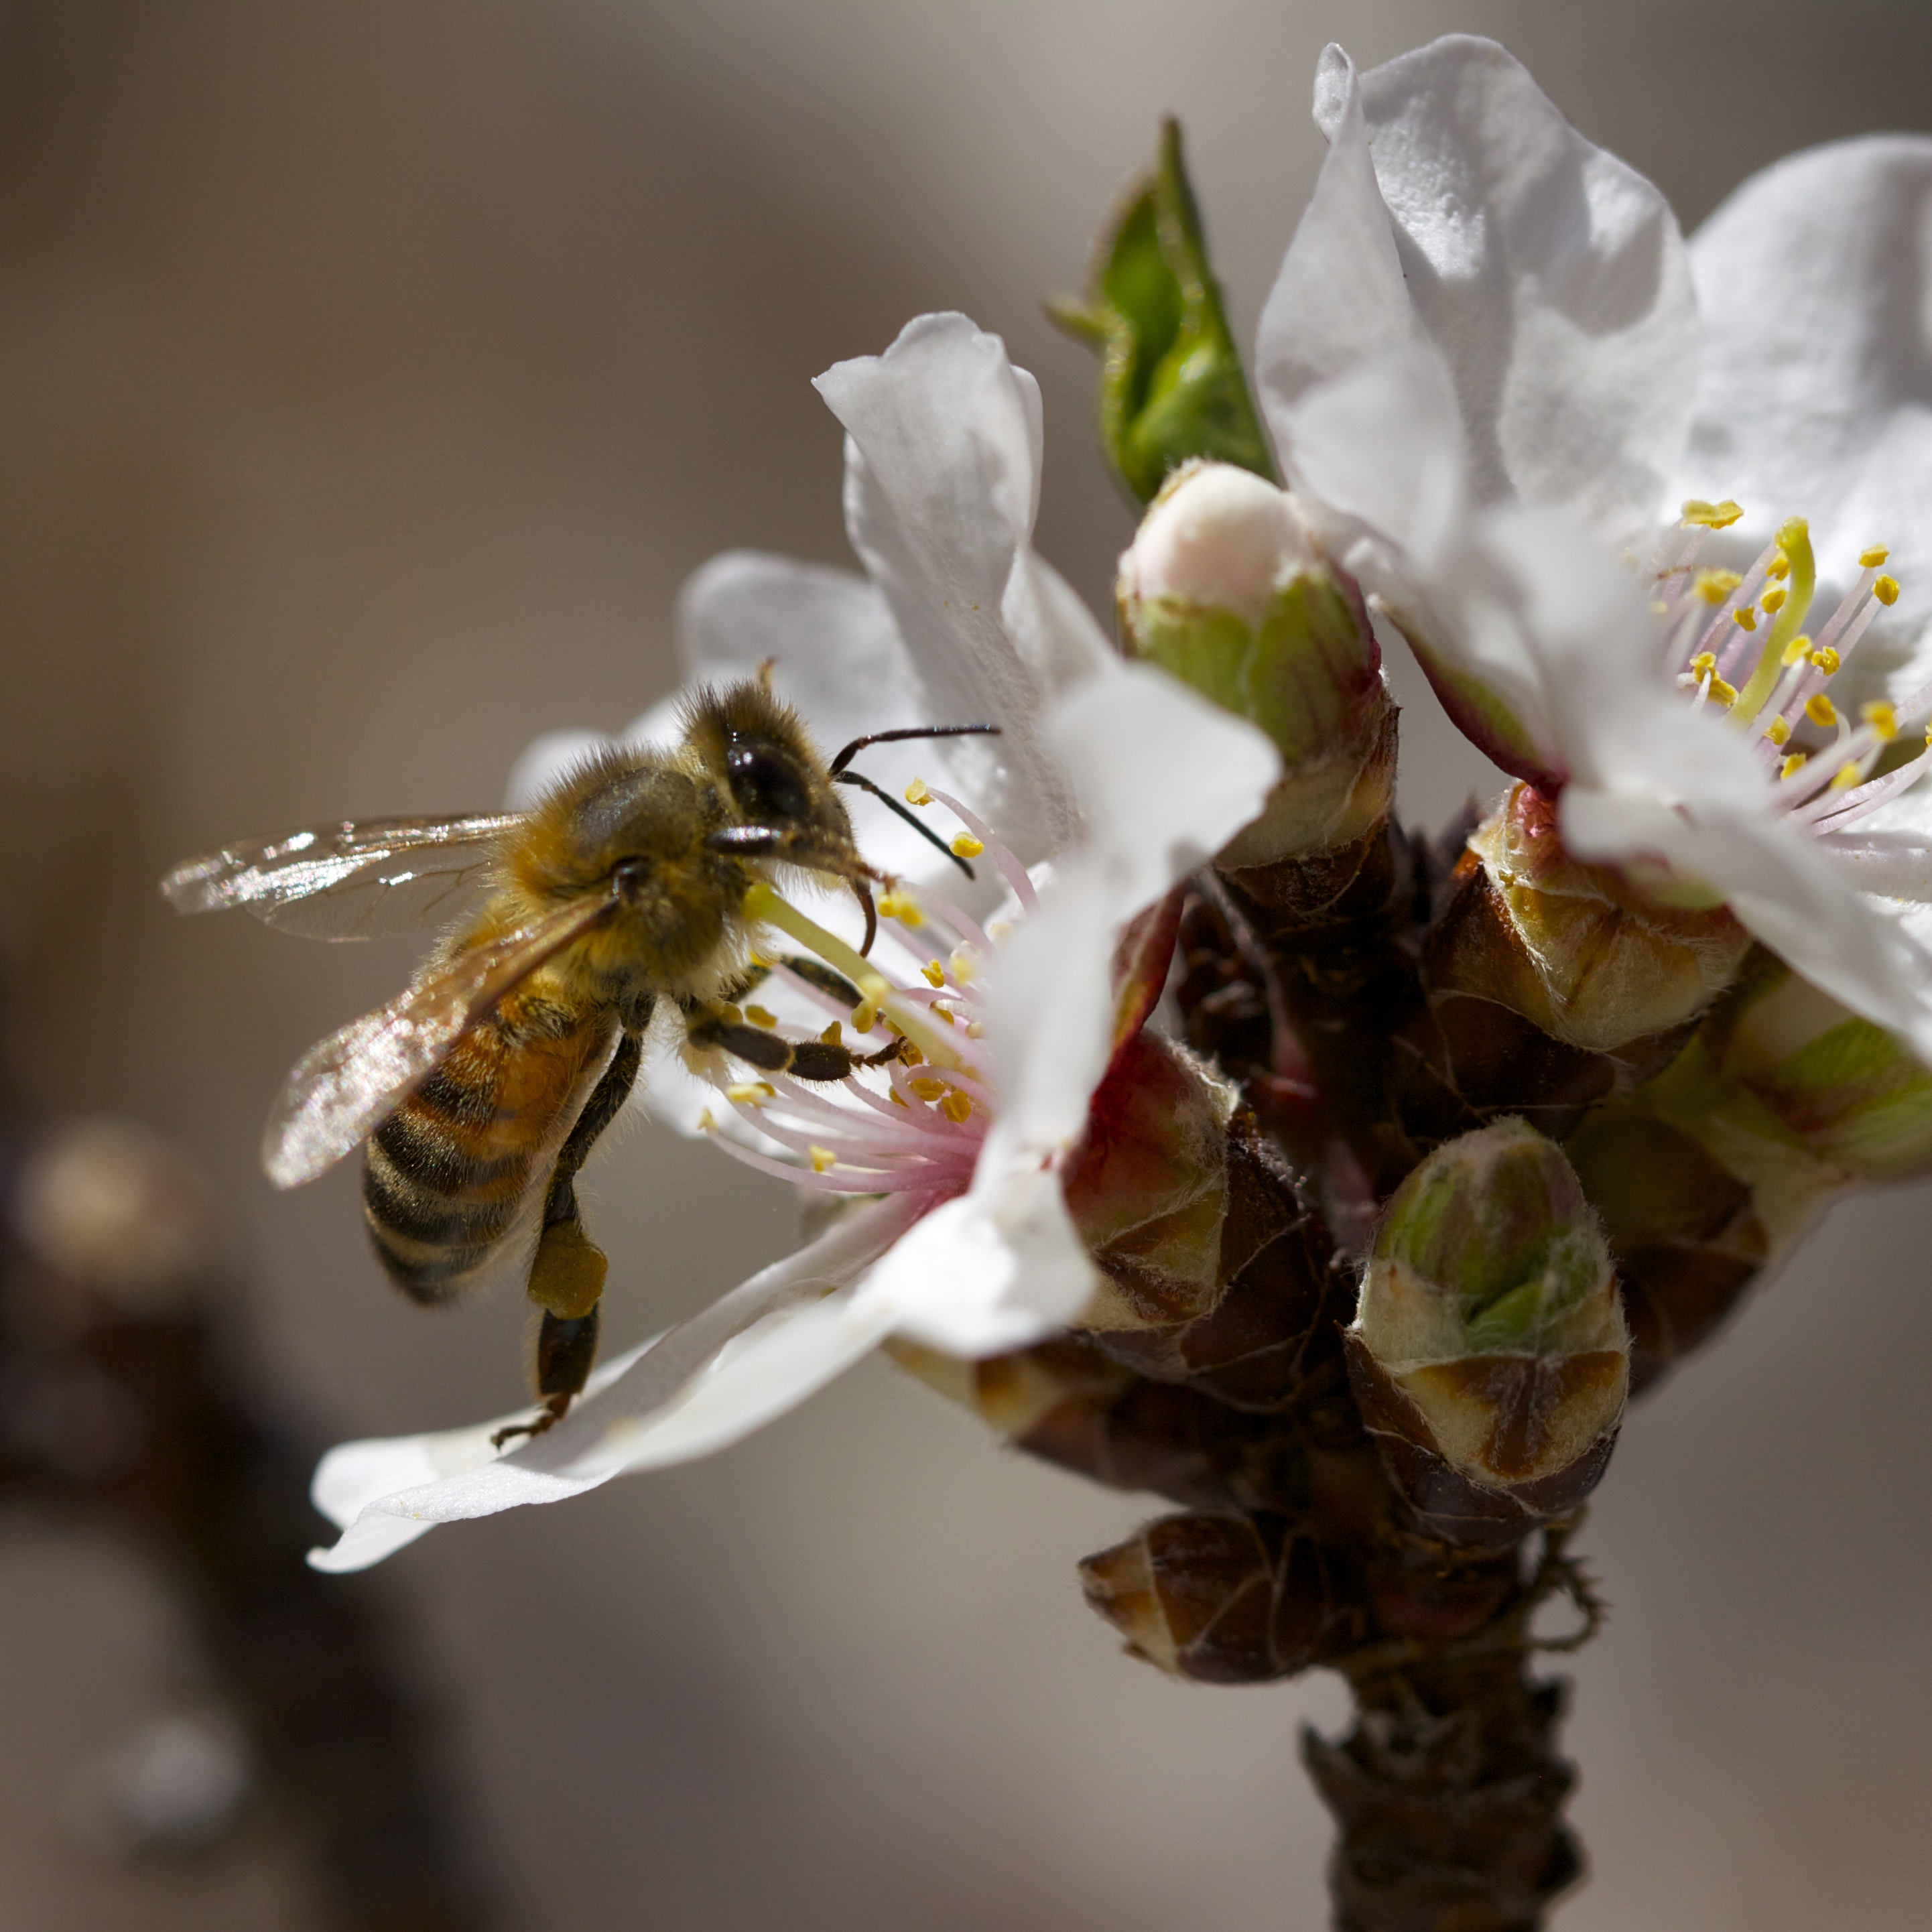 Honeybees back on the sweet smelling almond tree.